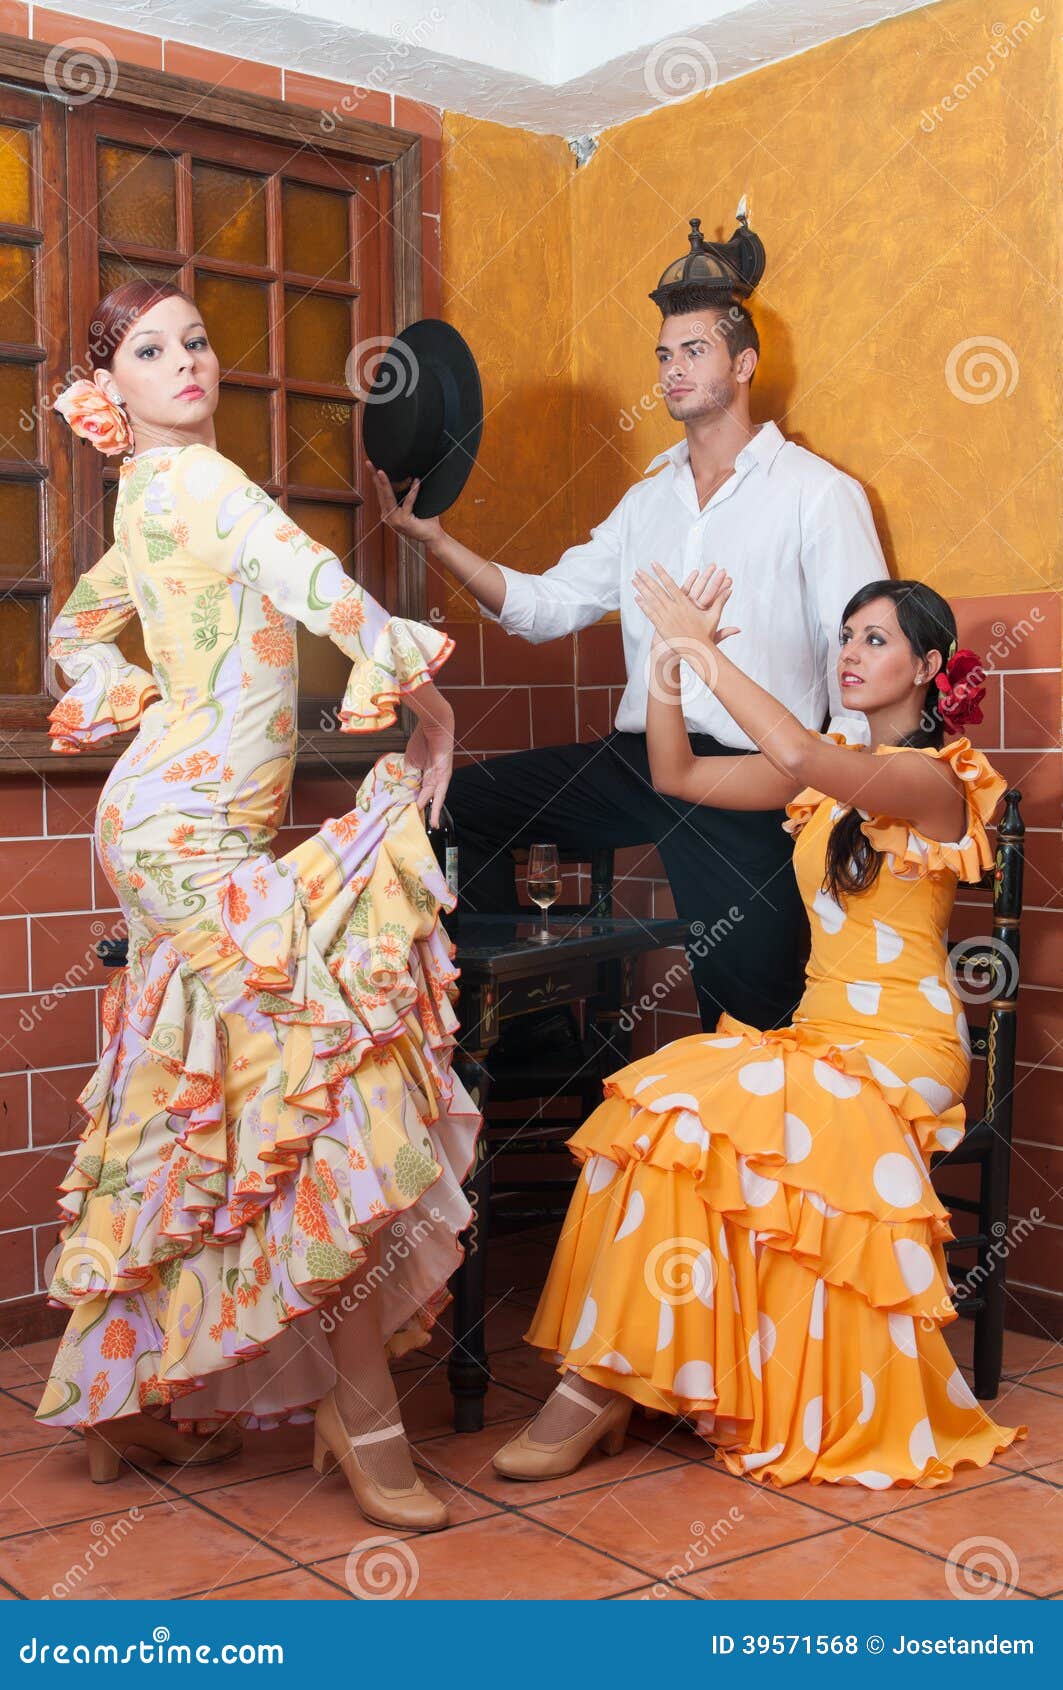 women and man in traditional flamenco dresses dance during the feria de abril on april spain